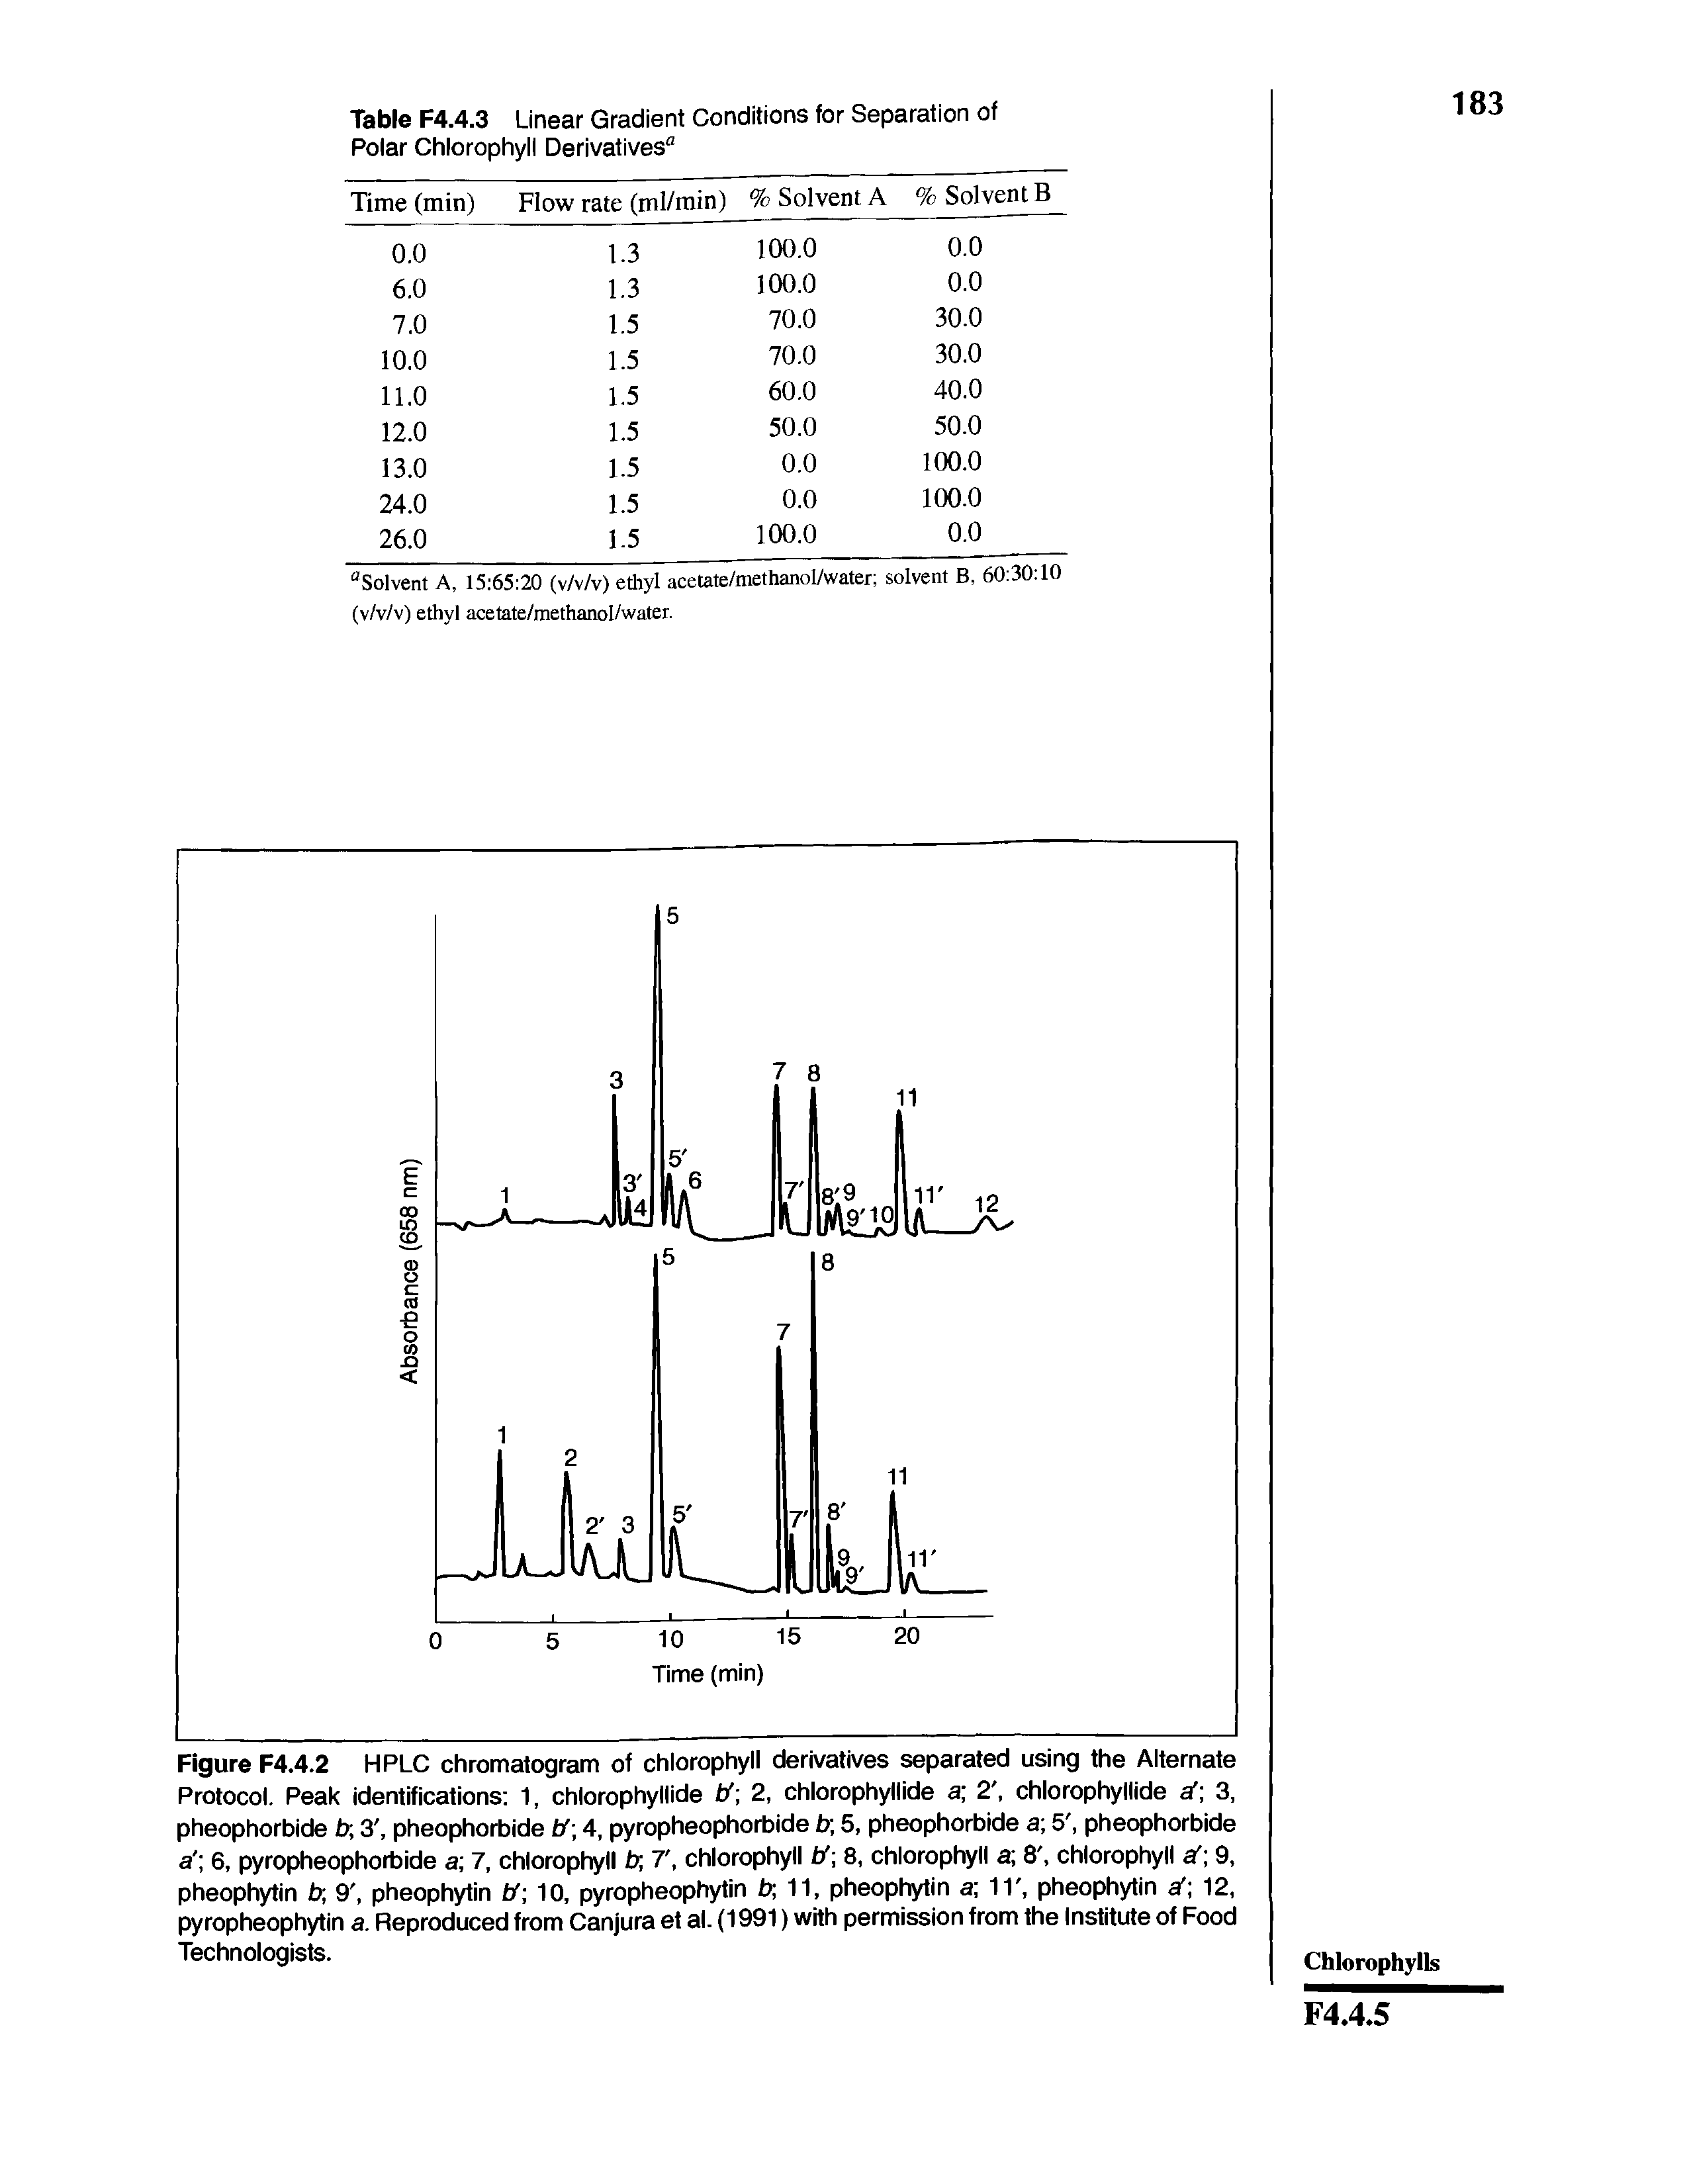 Figure F4.4.2 HPLC chromatogram of chlorophyll derivatives separated using the Alternate Protocol. Peak identifications 1, chlorophyllide if 2, chlorophyllide a 2, chlorophyllide a" 3, pheophorbide tr, 3, pheophorbide if 4, pyropheophorbide b 5, pheophorbide a 5, pheophorbide a 6, pyropheophorbide a 7, chlorophyll tr, 7, chlorophyll if 8, chlorophyll a 8, chlorophyll a 9, pheophytin tr, 9, pheophytin tf 10, pyropheophytin tr, 11, pheophytin a 11, pheophytin a 12, pyropheophytin a. Reproduced from Canjura et al. (1991) with permission from the Institute of Food Technologists.